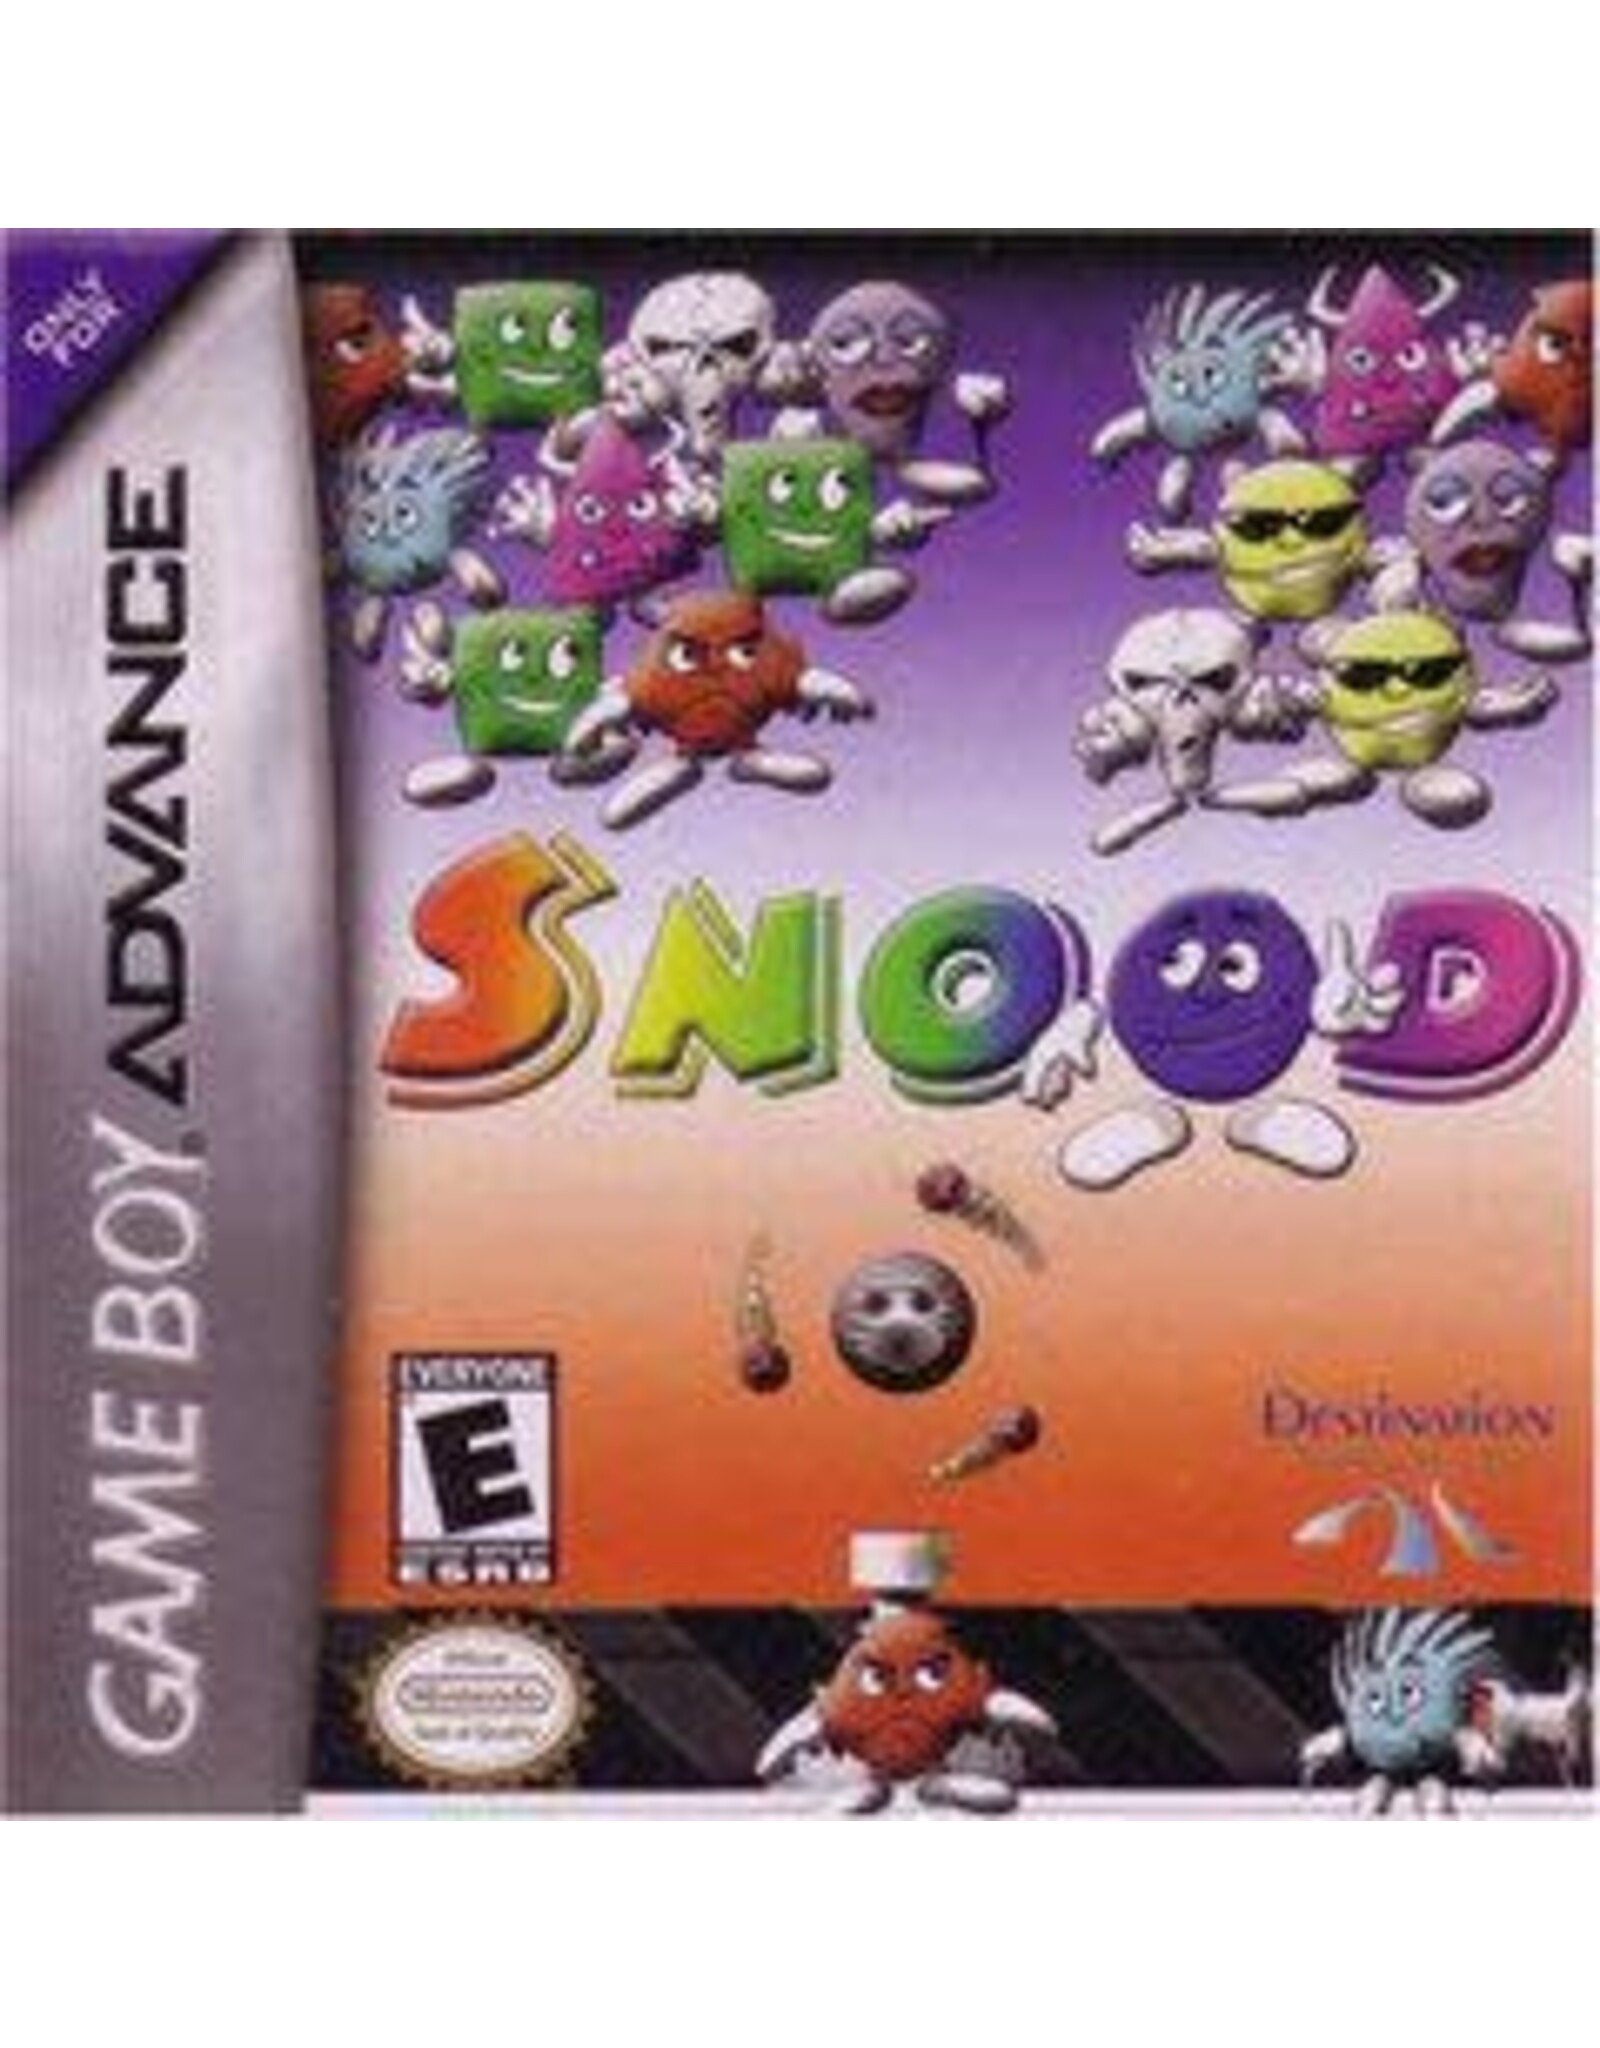 Game Boy Advance Snood (Cart Only)